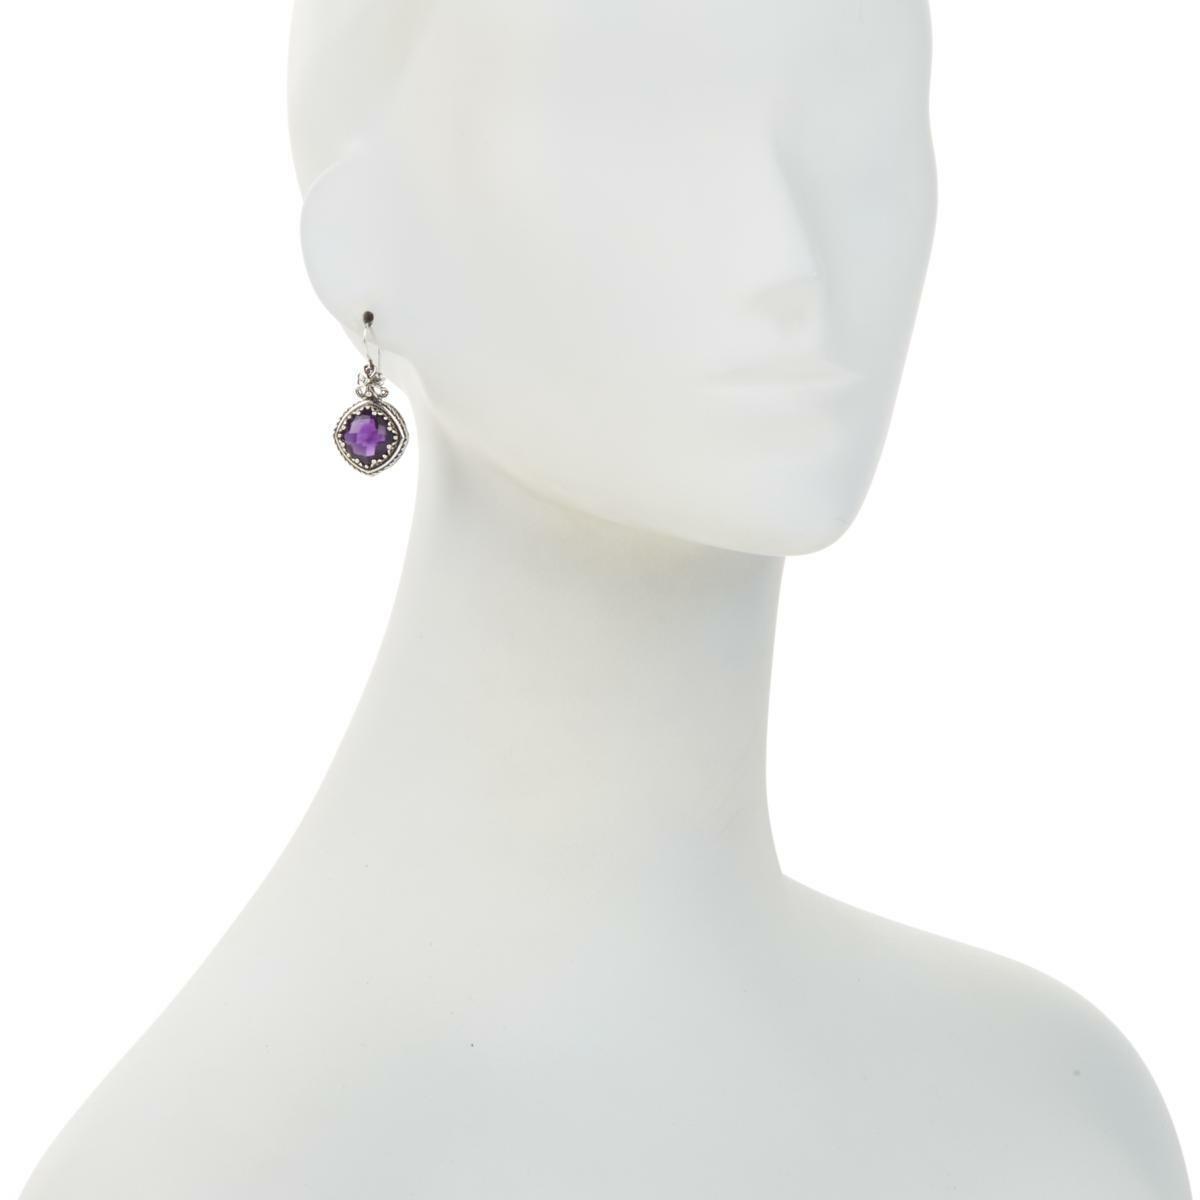 Ottoman Silver Jewelry Collection 11.8ctw Cushion-Cut Amethyst Drop Earrings